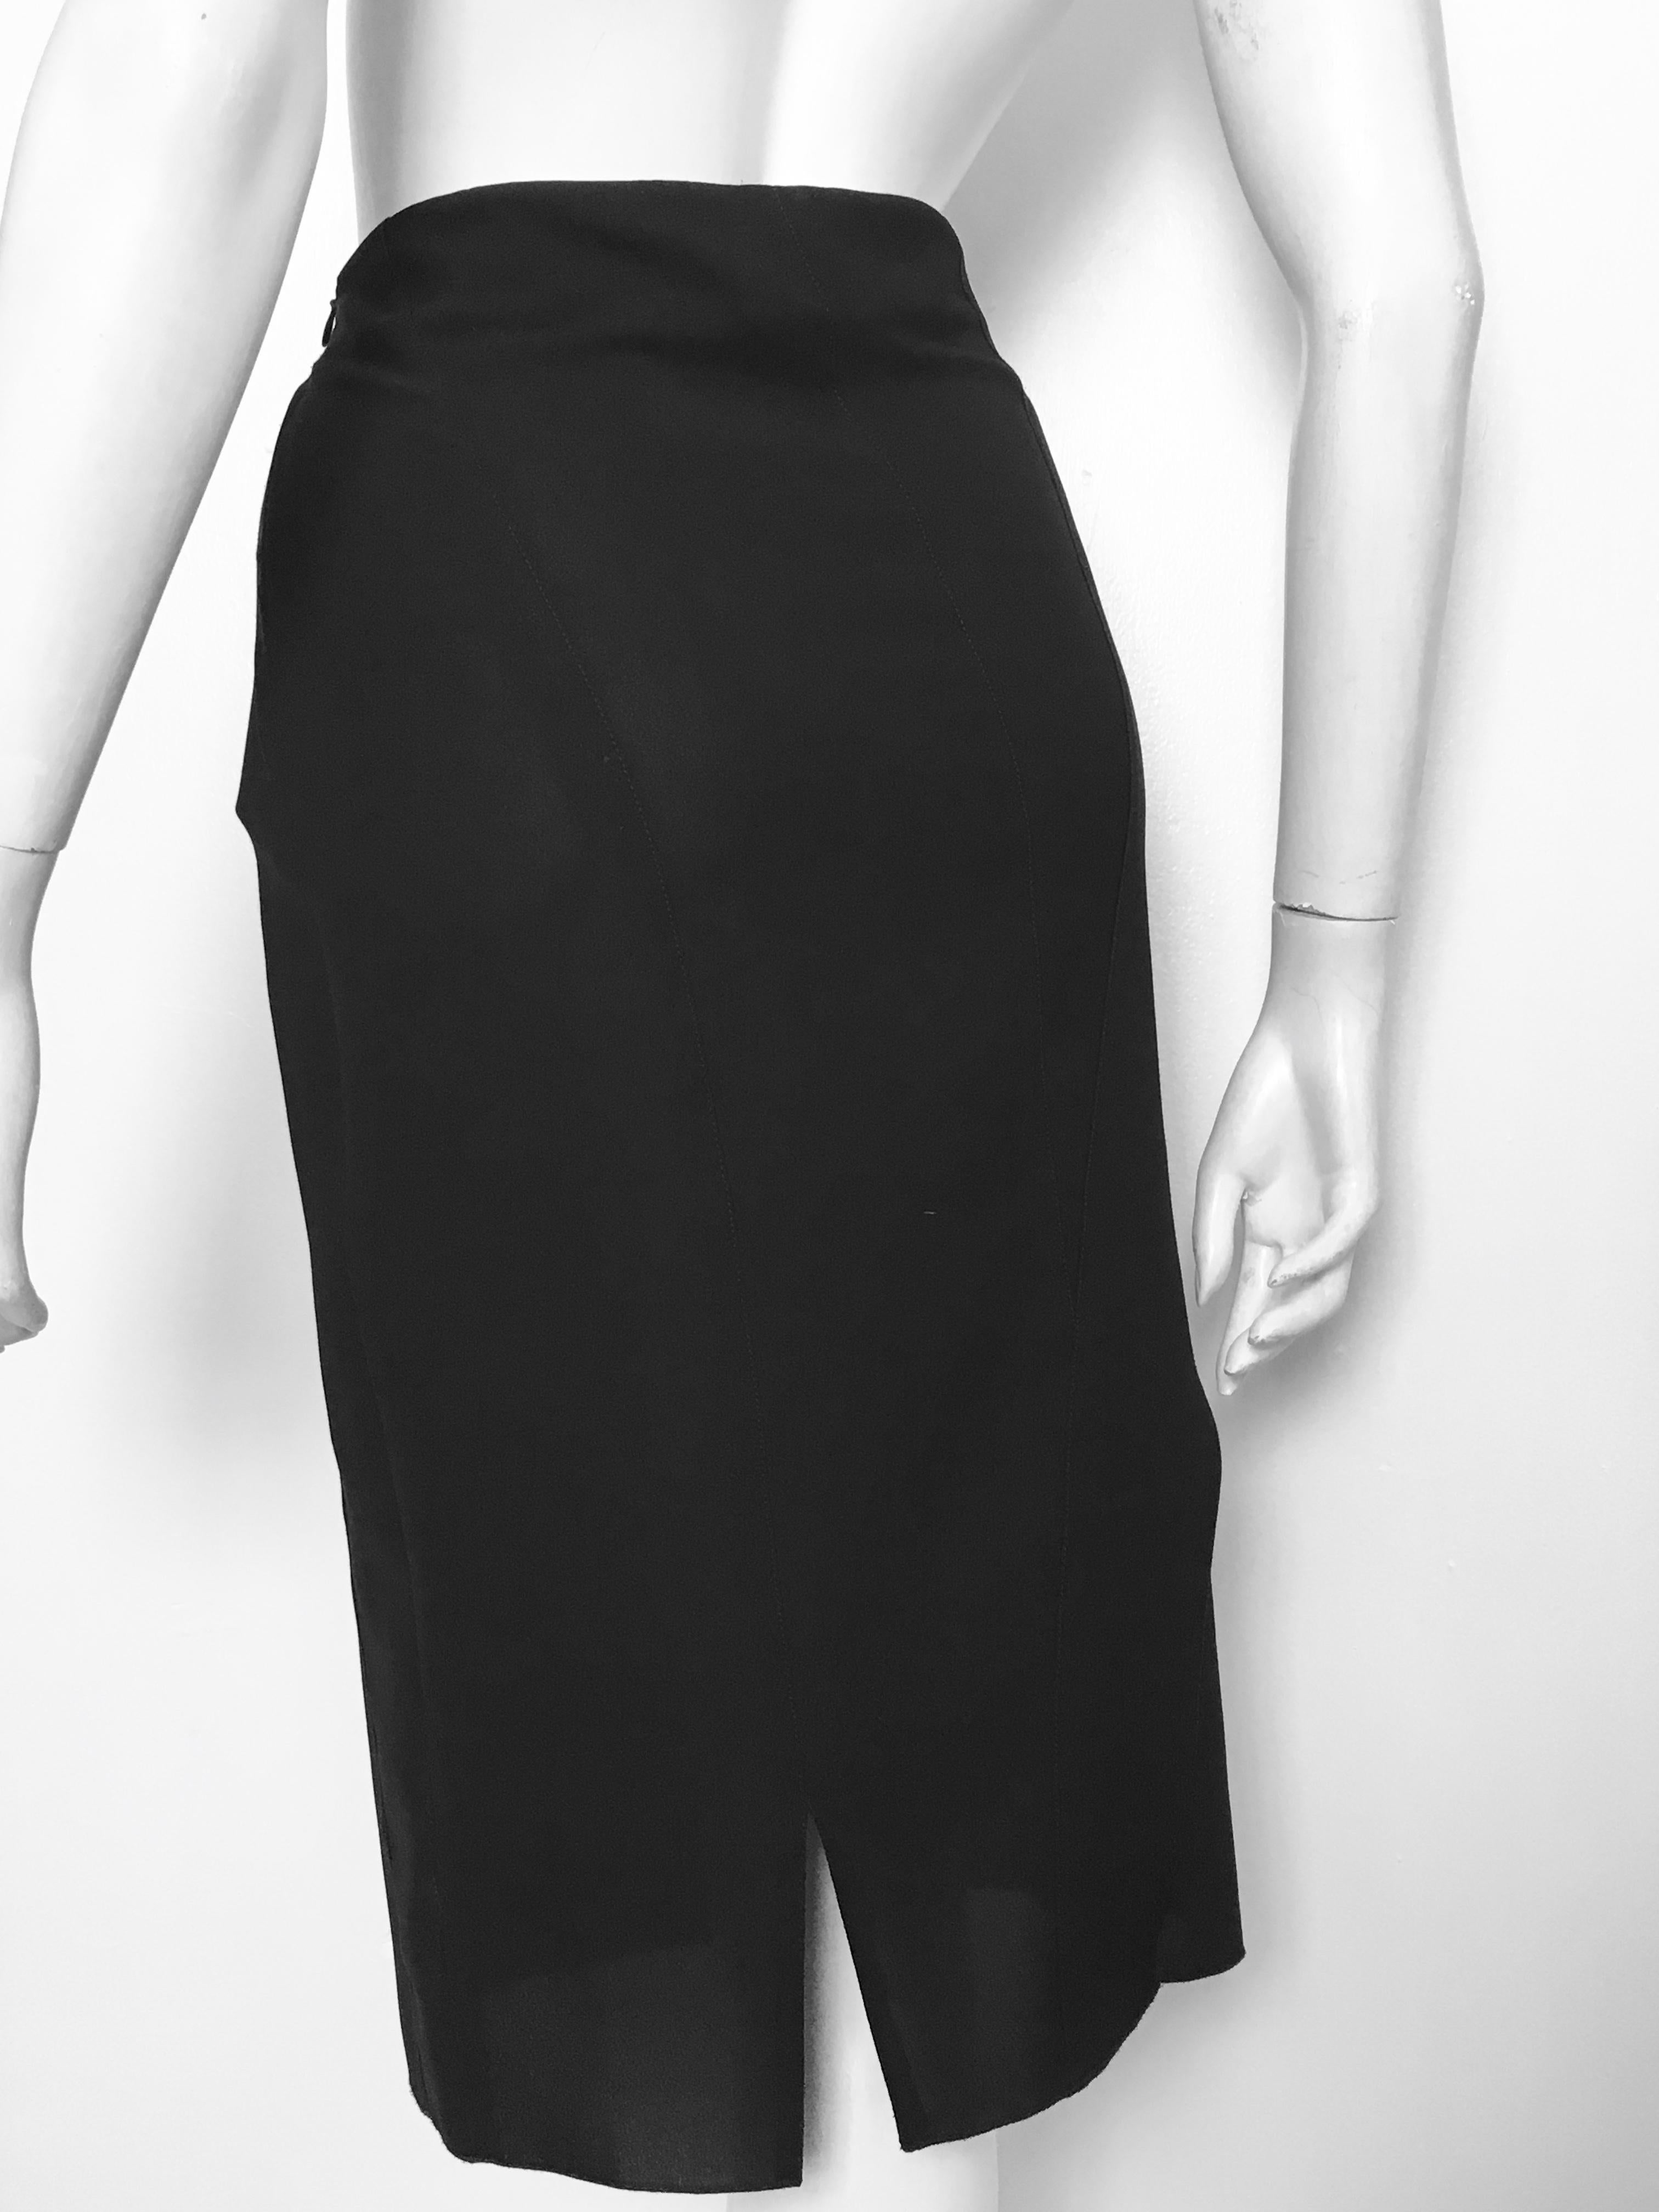 Donna Karan 1990s Black Sheer Skirt Size 8, made in Italy. For Sale 10